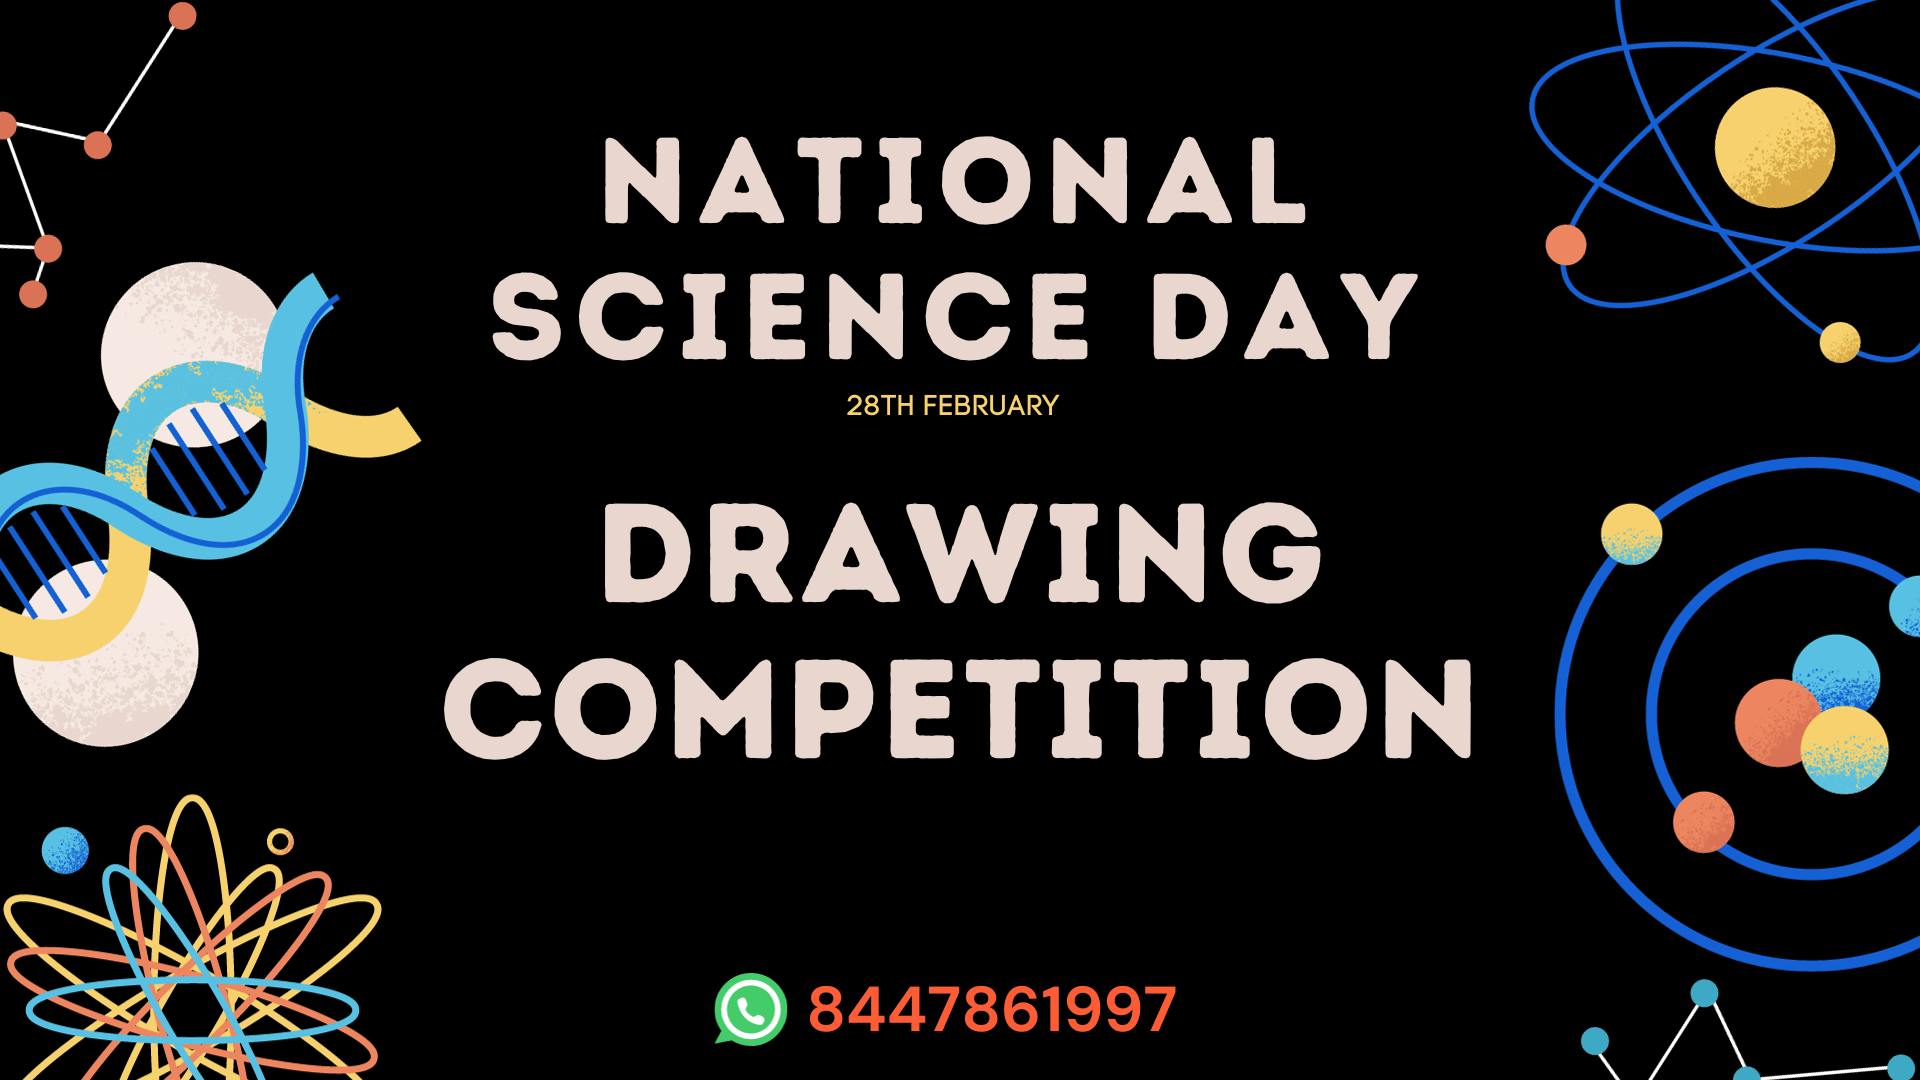 Child art competition results for Science Day painting contest